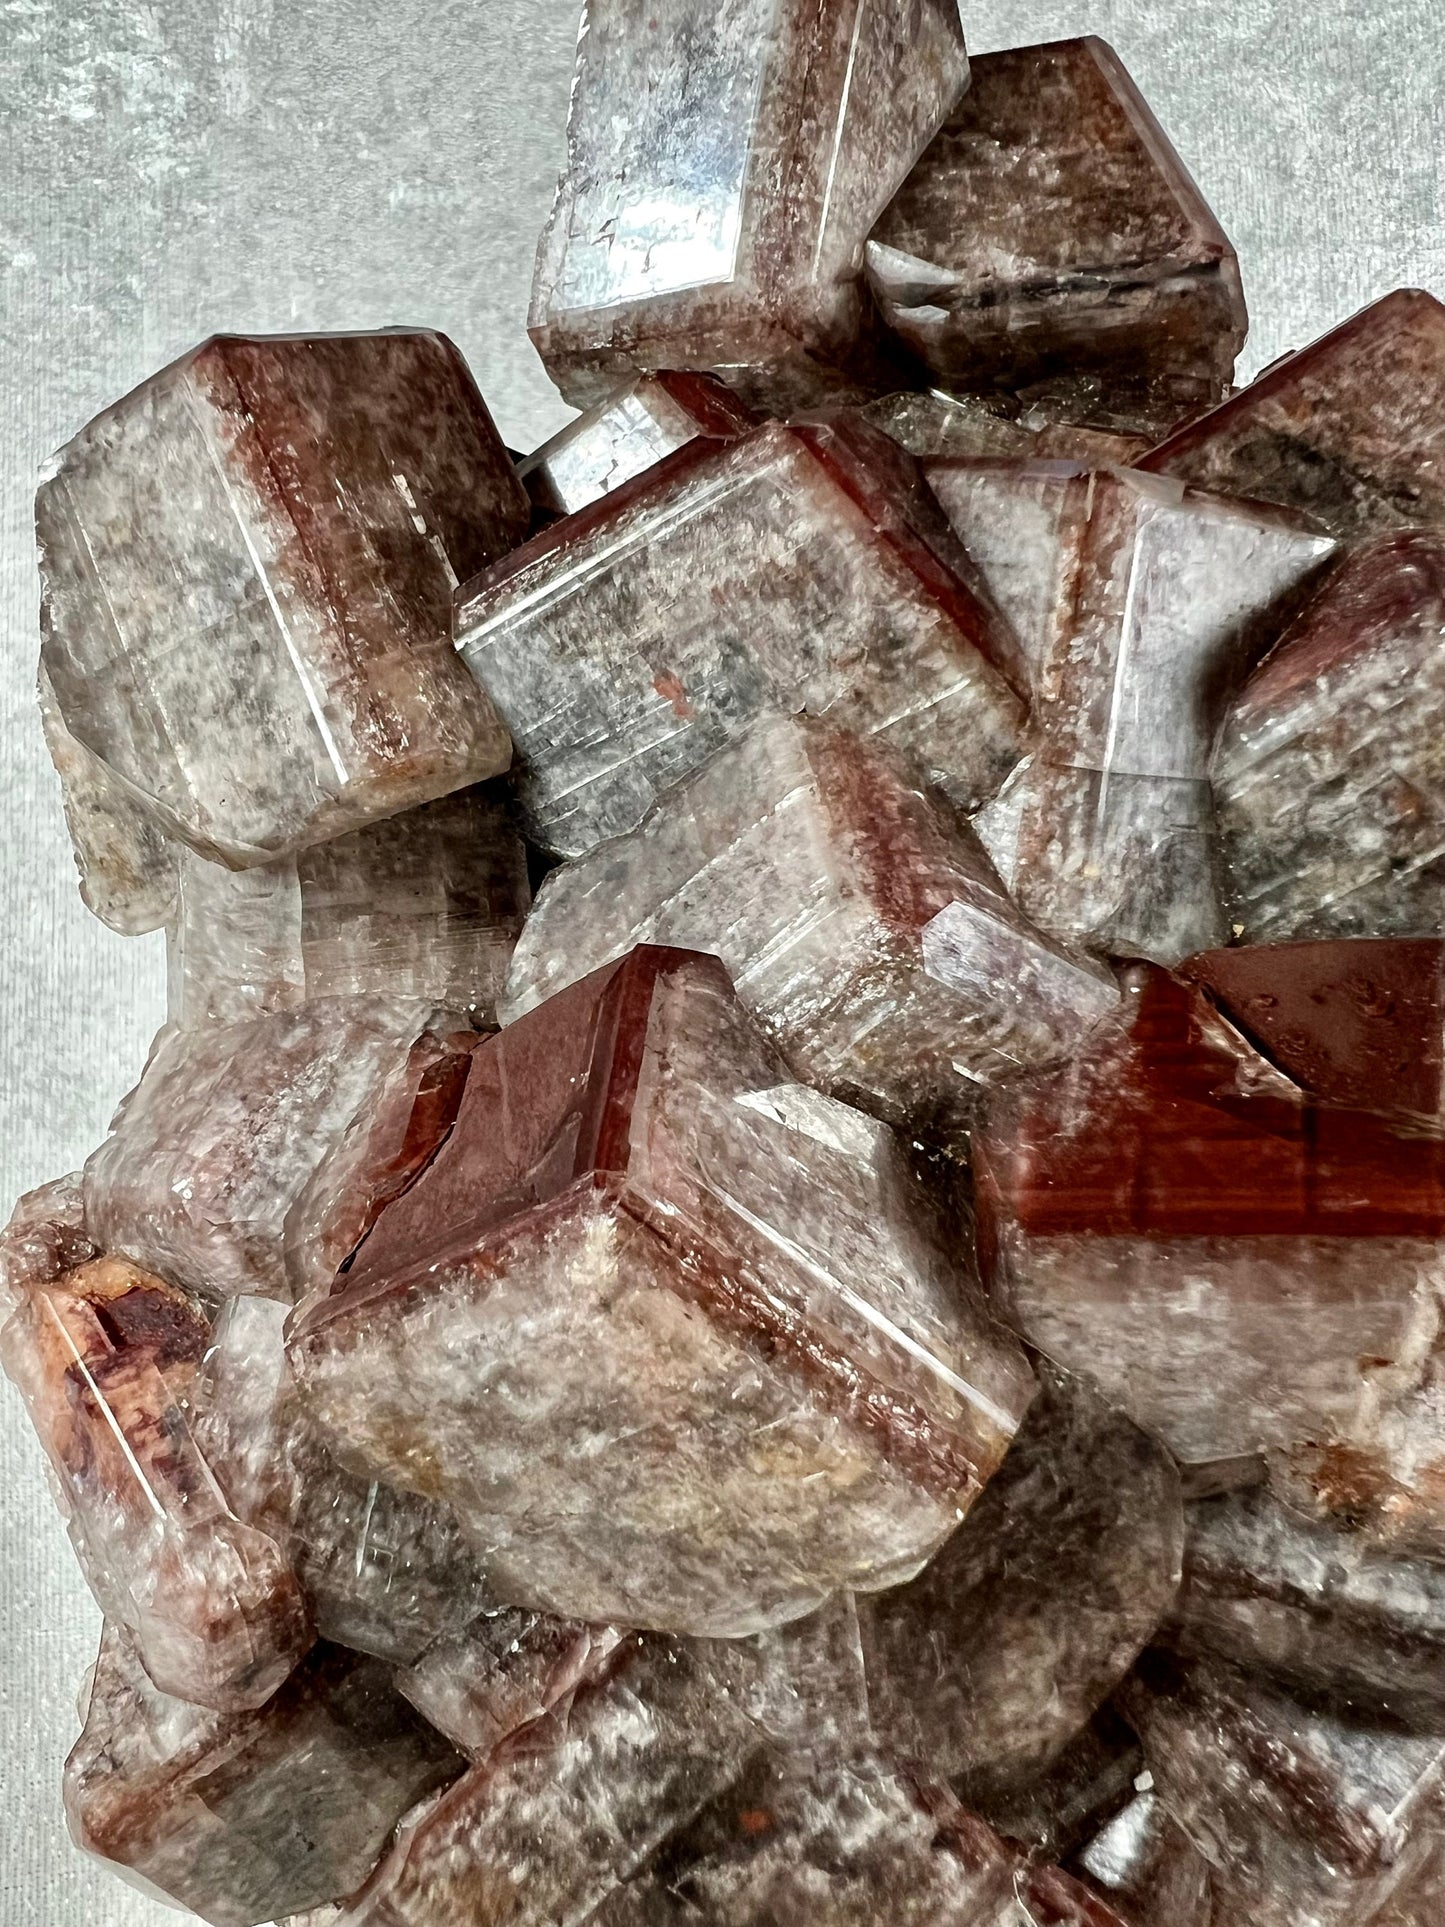 XL Chocolate Calcite Specimen. 5.2 lbs. Very High Quality. Stunning Cubic Hematite Calcite Cluster. Incredible Crystal Display Specimen.